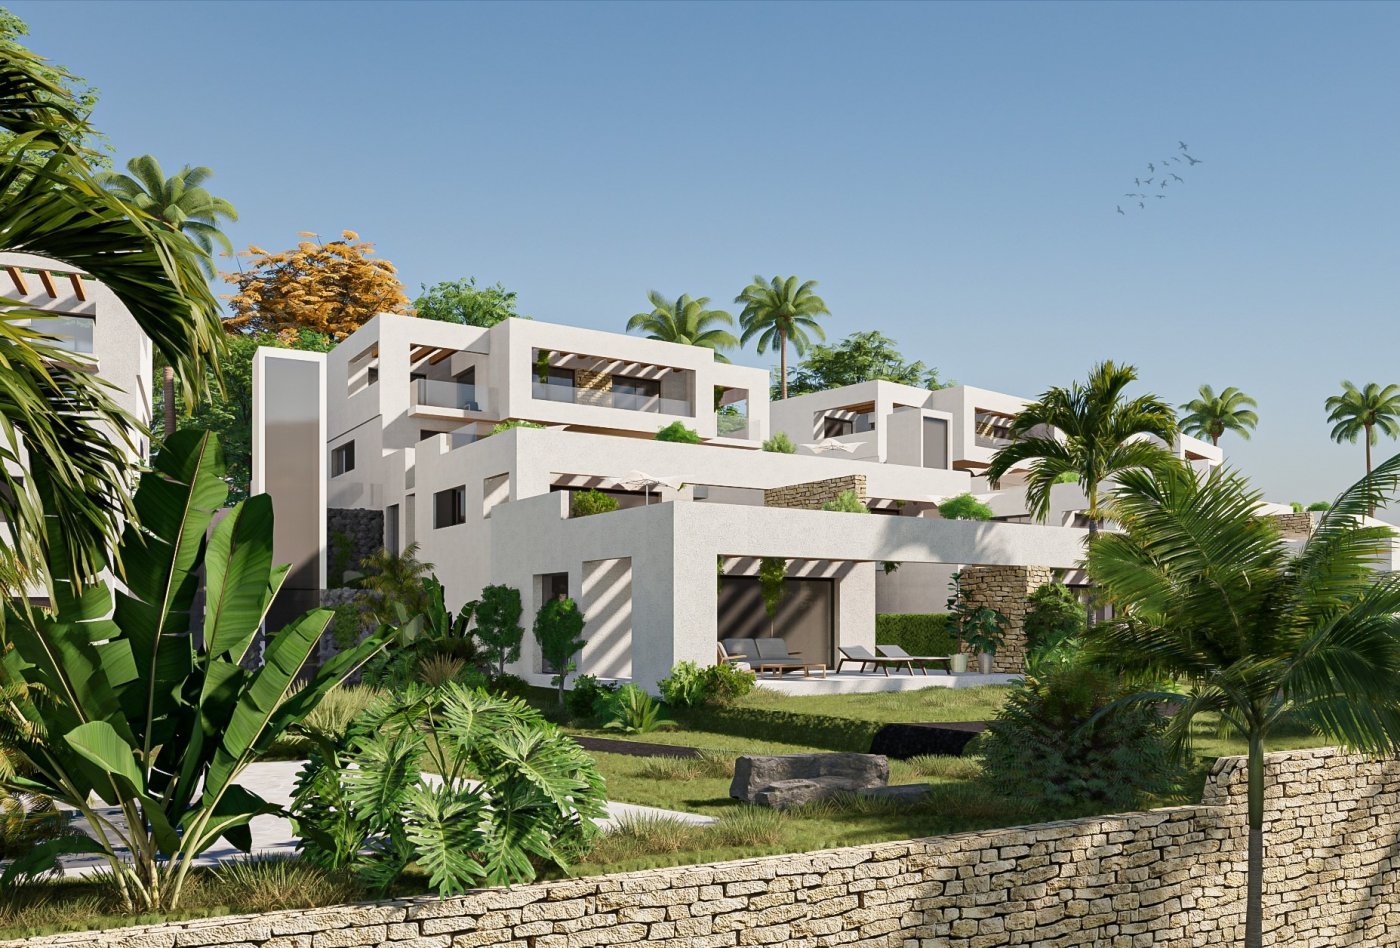 Monforte del Cid: new-build apartments with a view of the golf